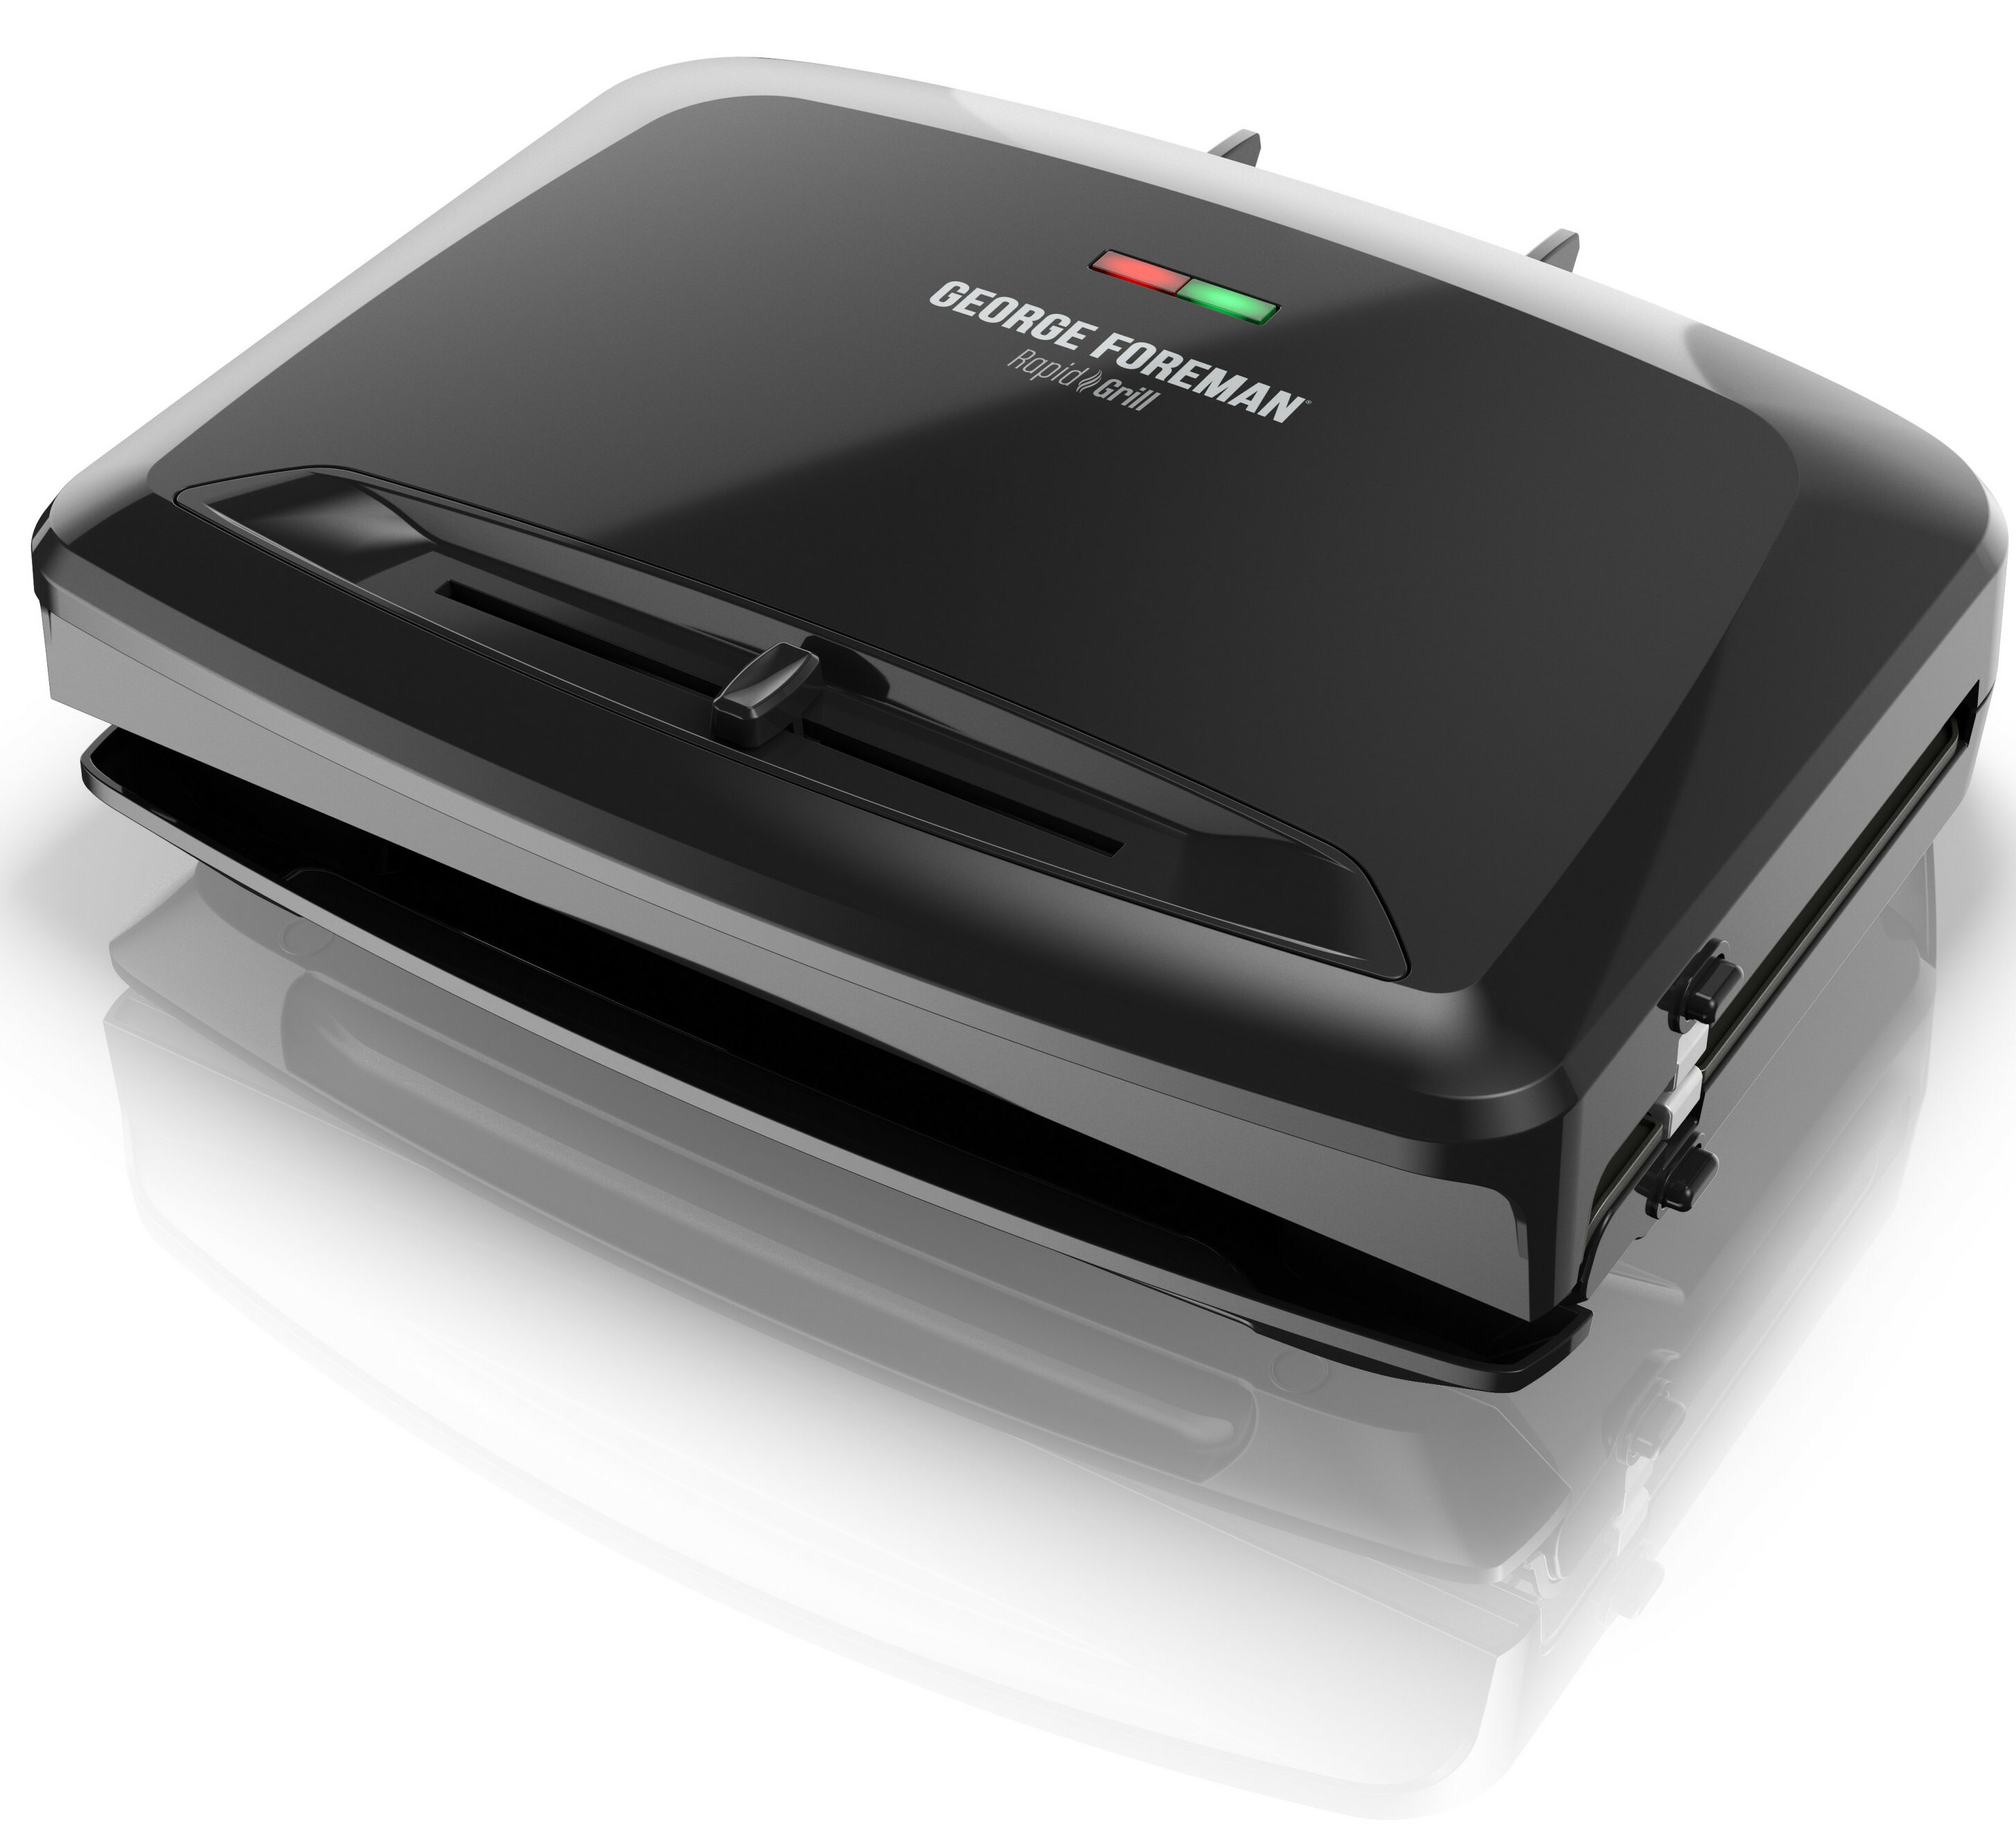 George Foreman 5-Serving Classic Plate Grill